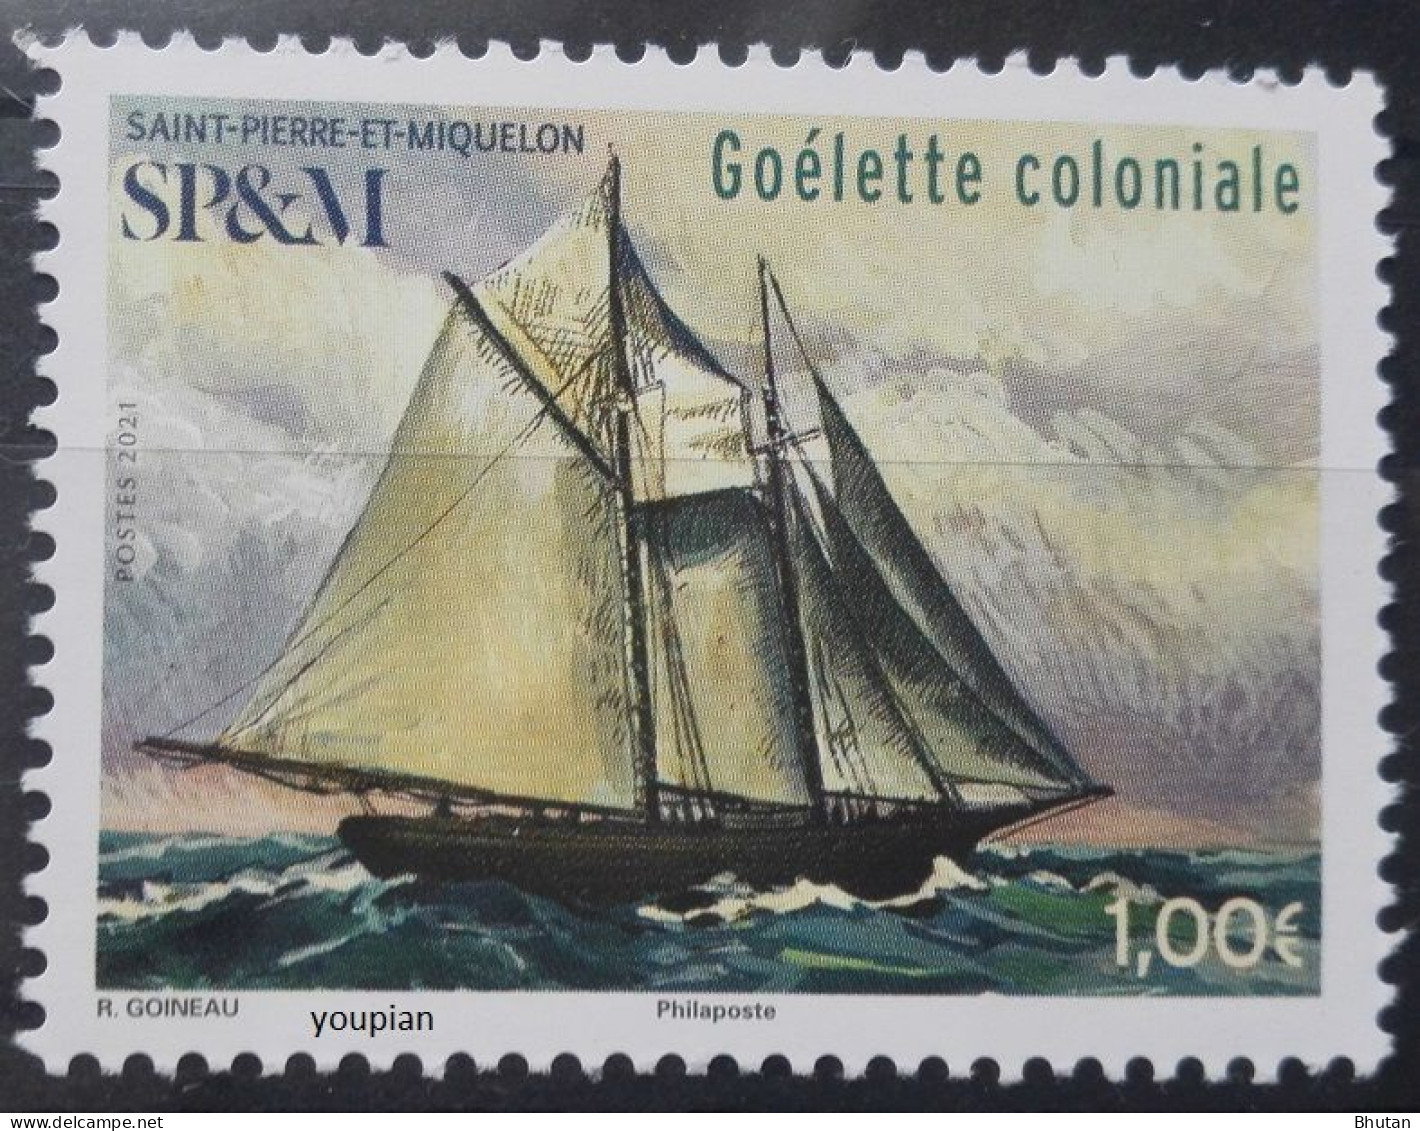 St. Pierre And Miquelon 2021, Goélette Coloniale Ship, MNH Single Stamp - Unused Stamps